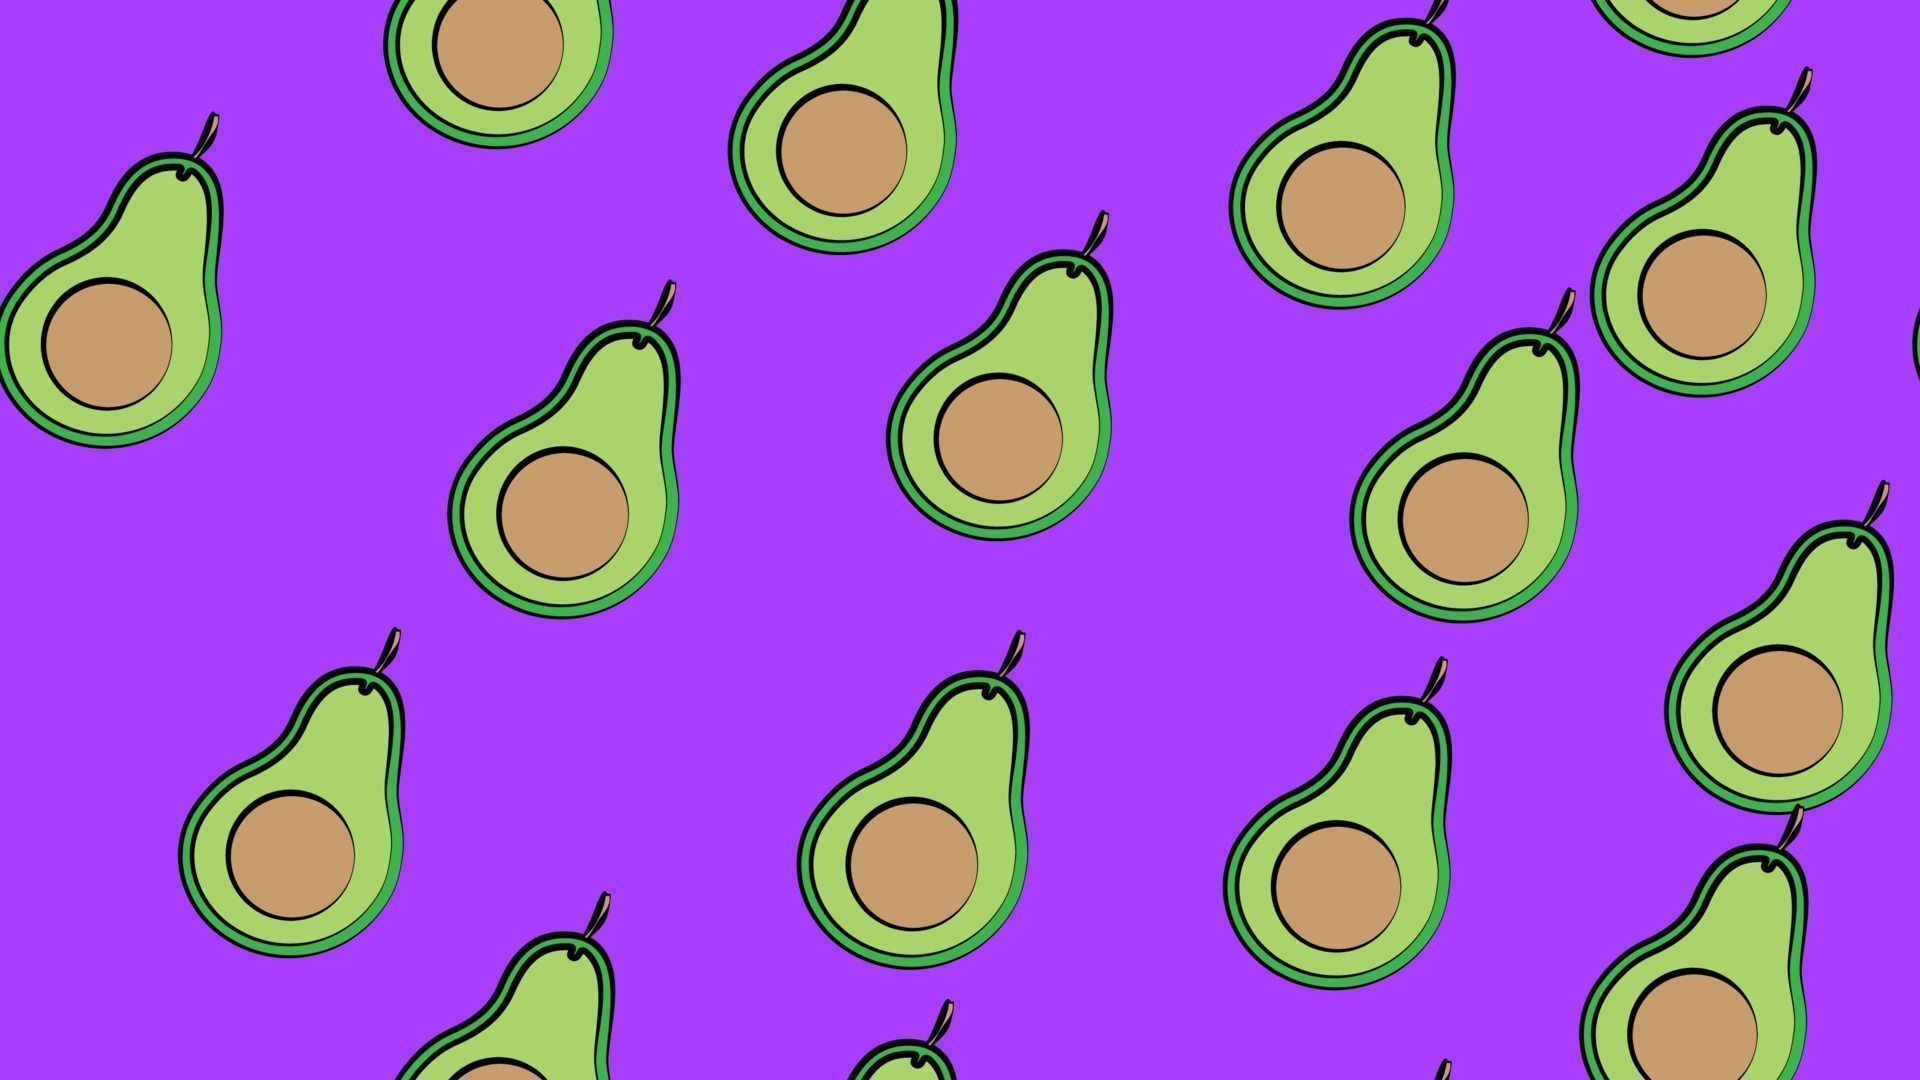 vector illustration. pattern with avocado. illustration for cafes and restaurants. cute wallpaper. avocado with a bone inside on a purple background